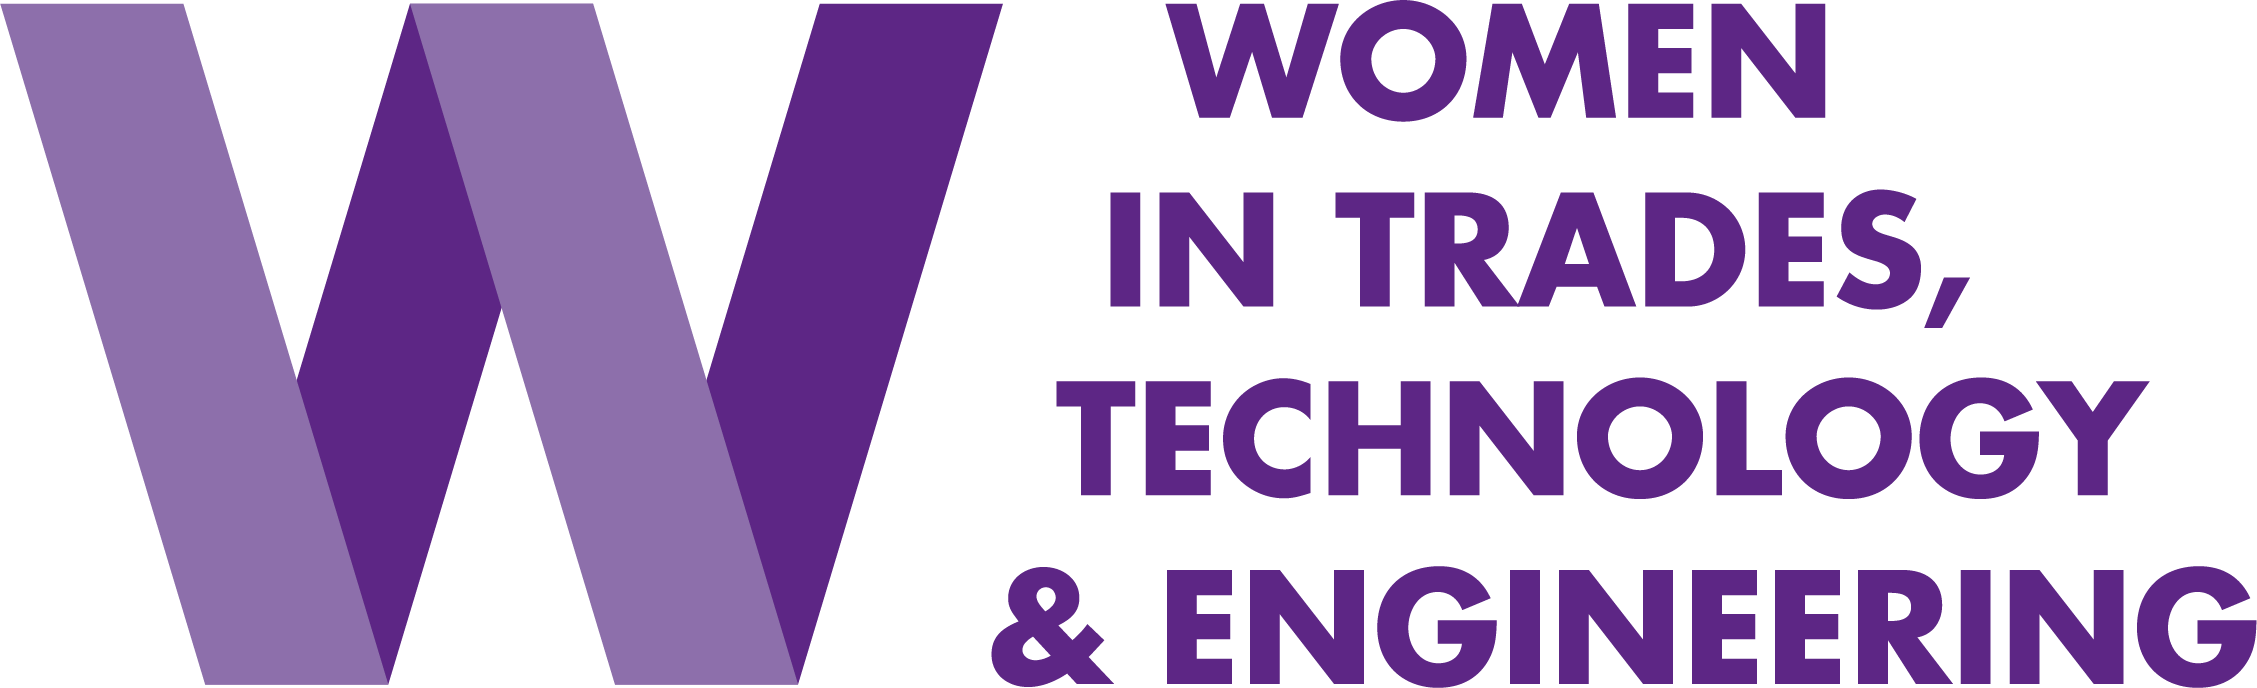 image of the Women in Trades, Technology and Engineering logo